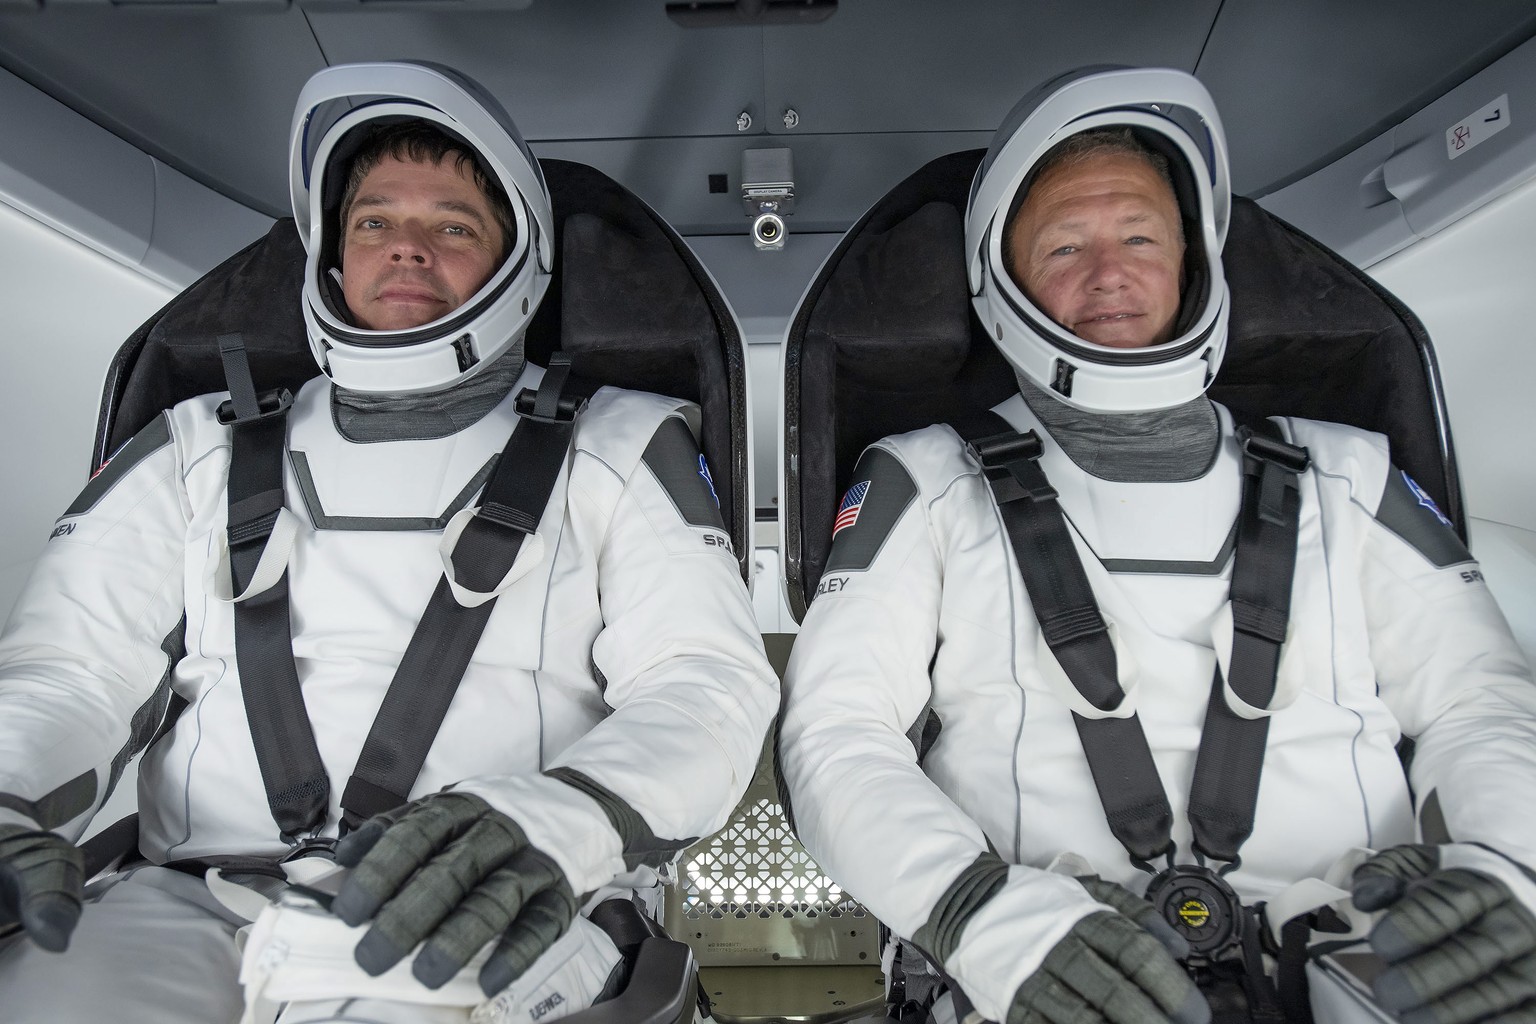 epa08370713 A handout picture made available by SpaceX shows SpaceX NASA astronauts Bob Behnken (L) and Doug Hurley (R) participating in a fully integrated test of critical crew flight hardware ahead  ...